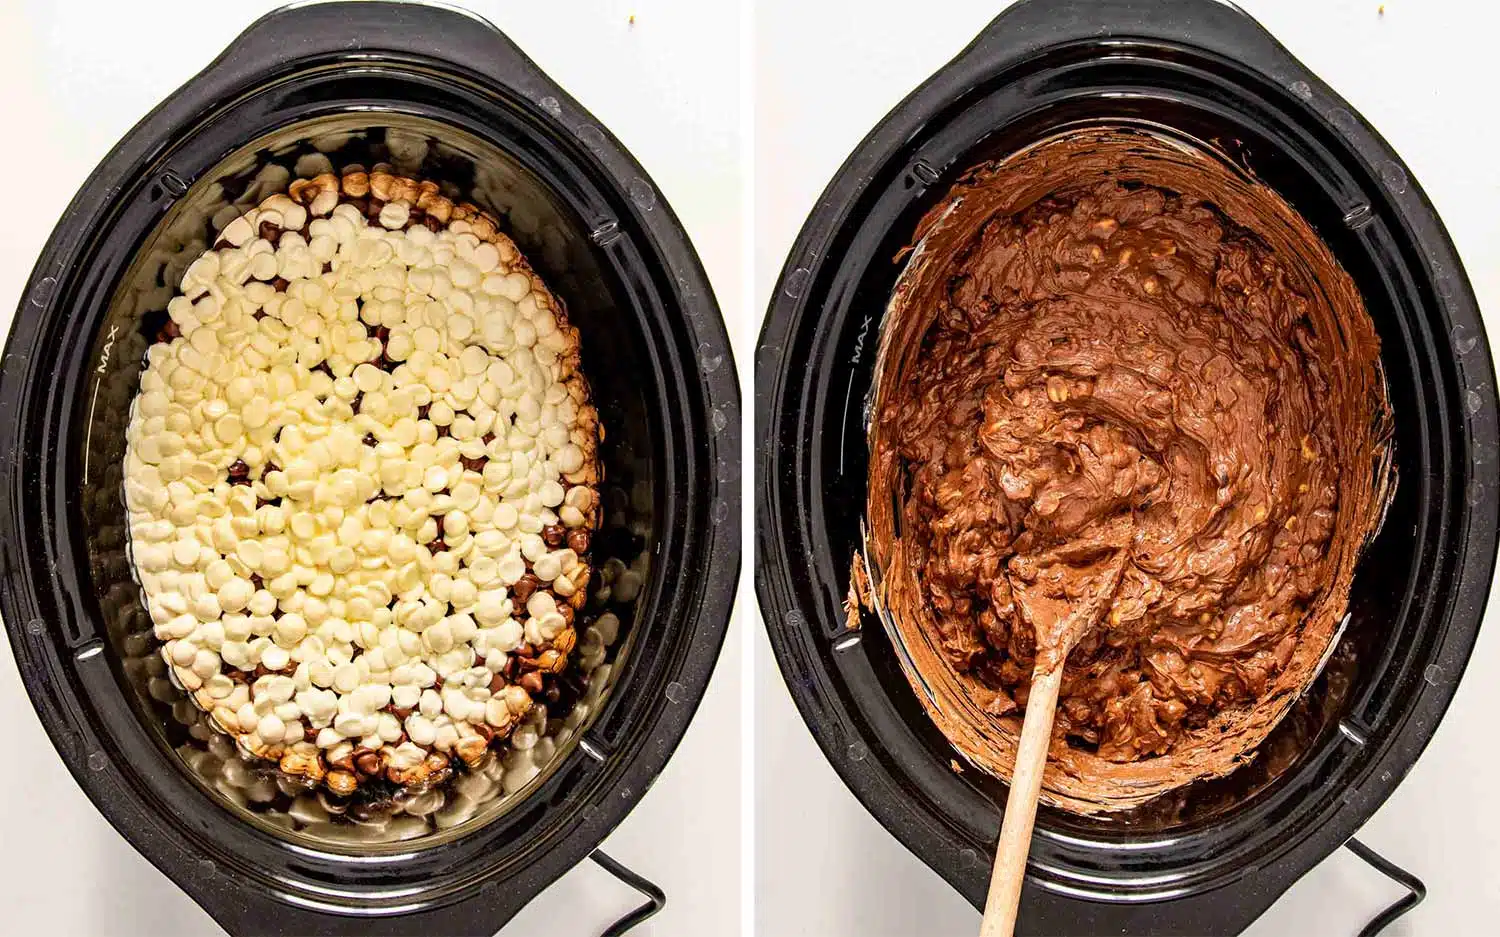 process shots showing how to make slow cooker chocolate candy.